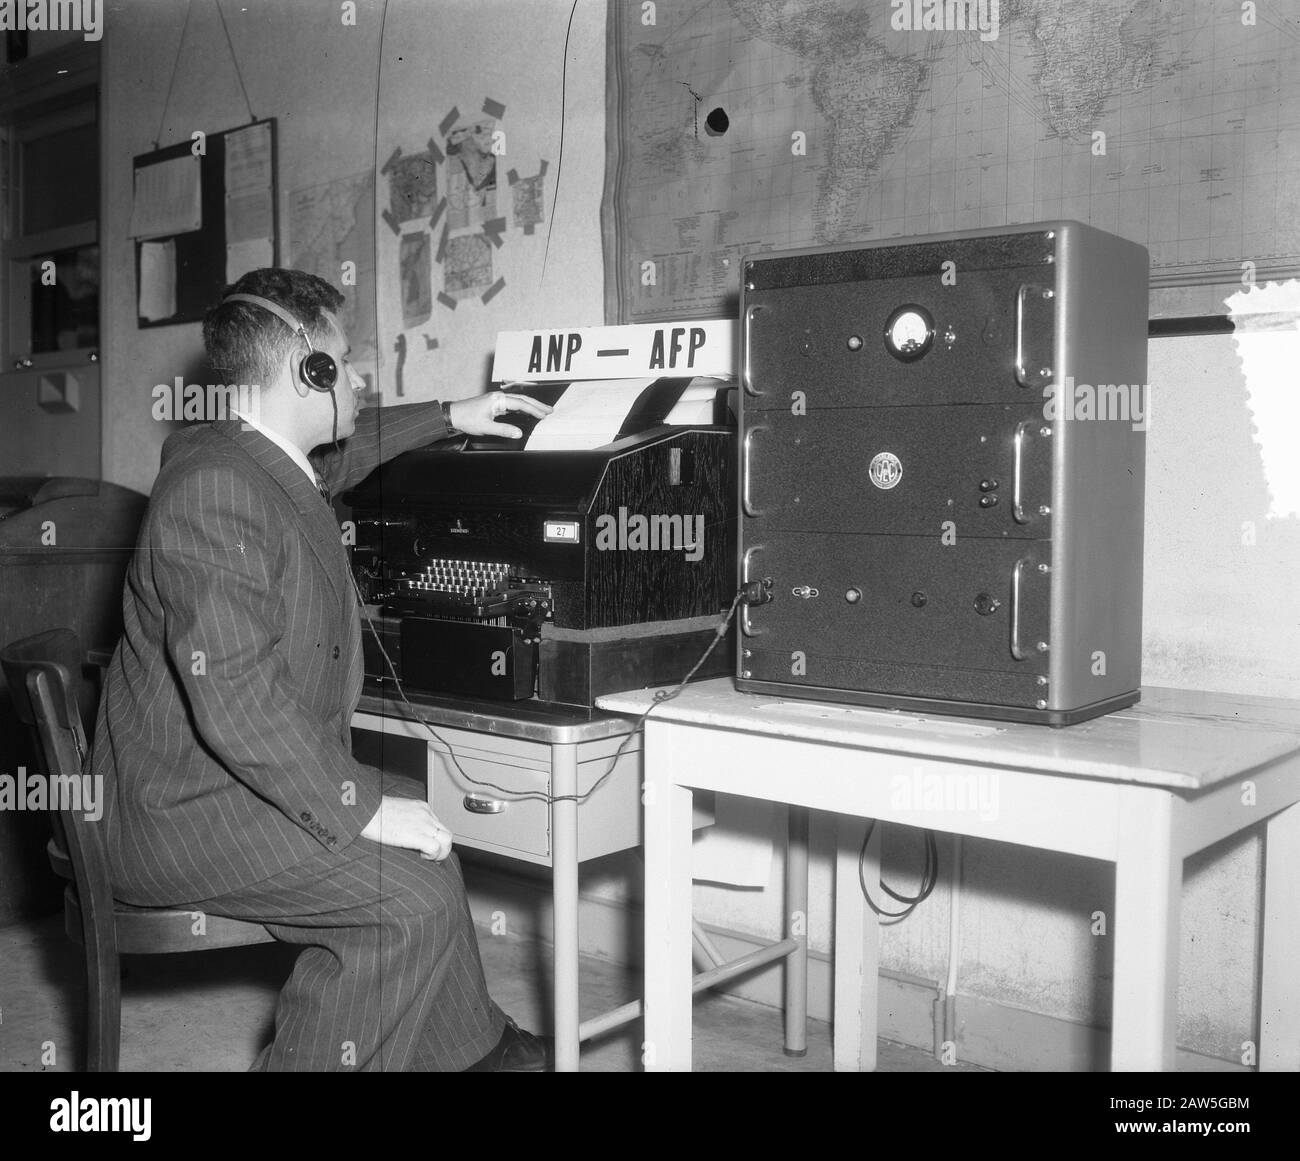 New fax machine ANP / AFP Hague Date: December 6, 1951 Location: The Hague, South Holland Stock Photo